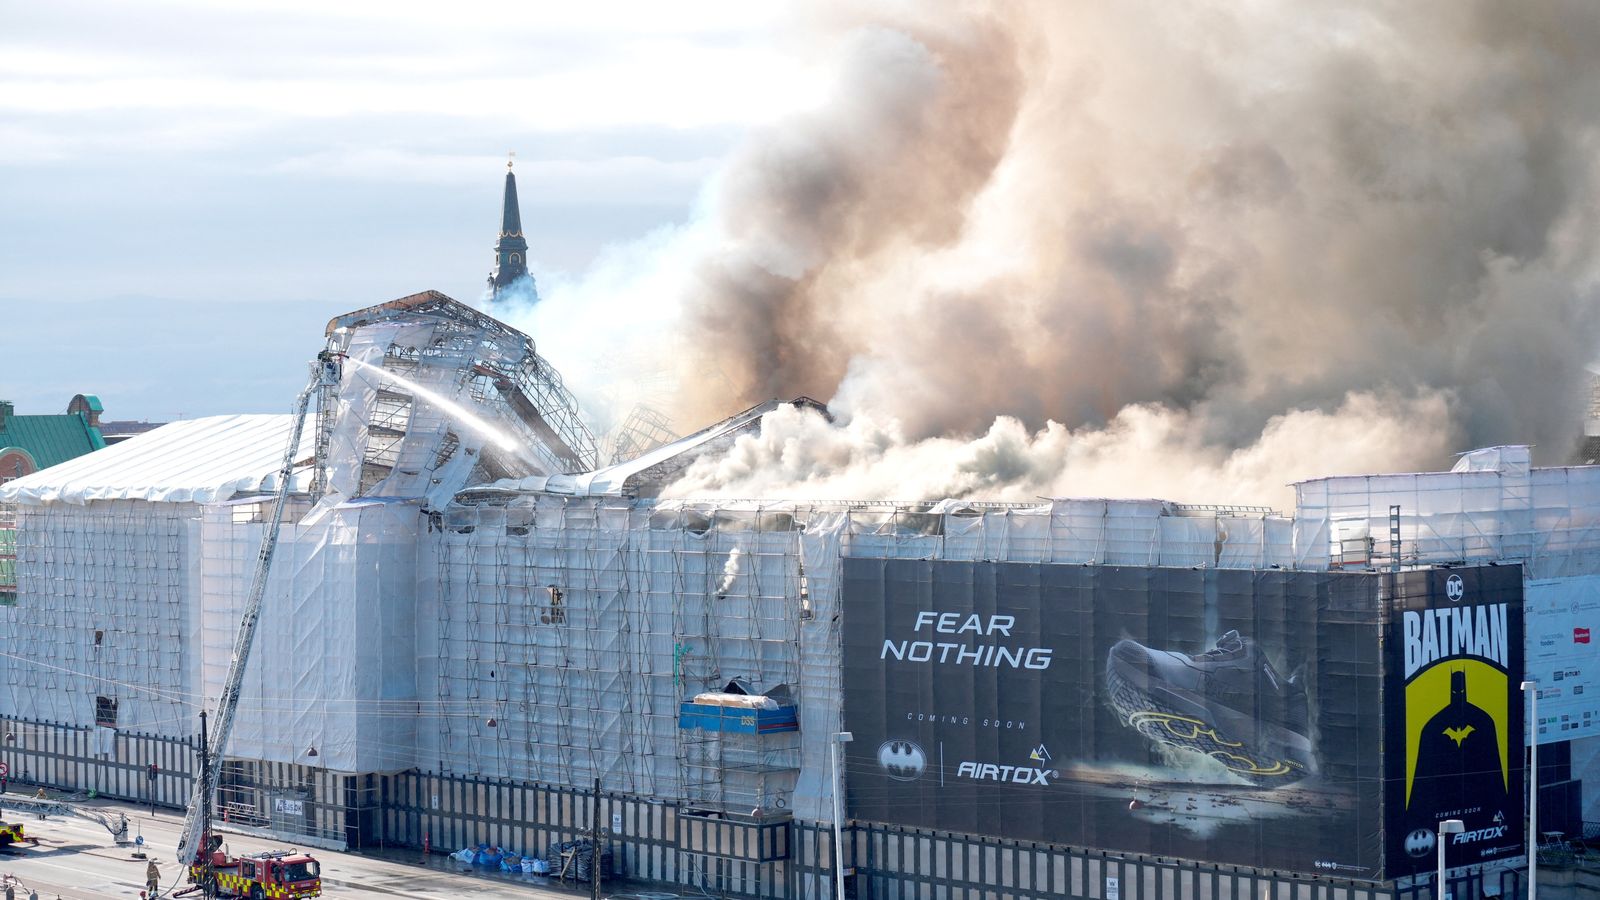 fire breaks out at one of copenhagen's oldest buildings - as spire collapses